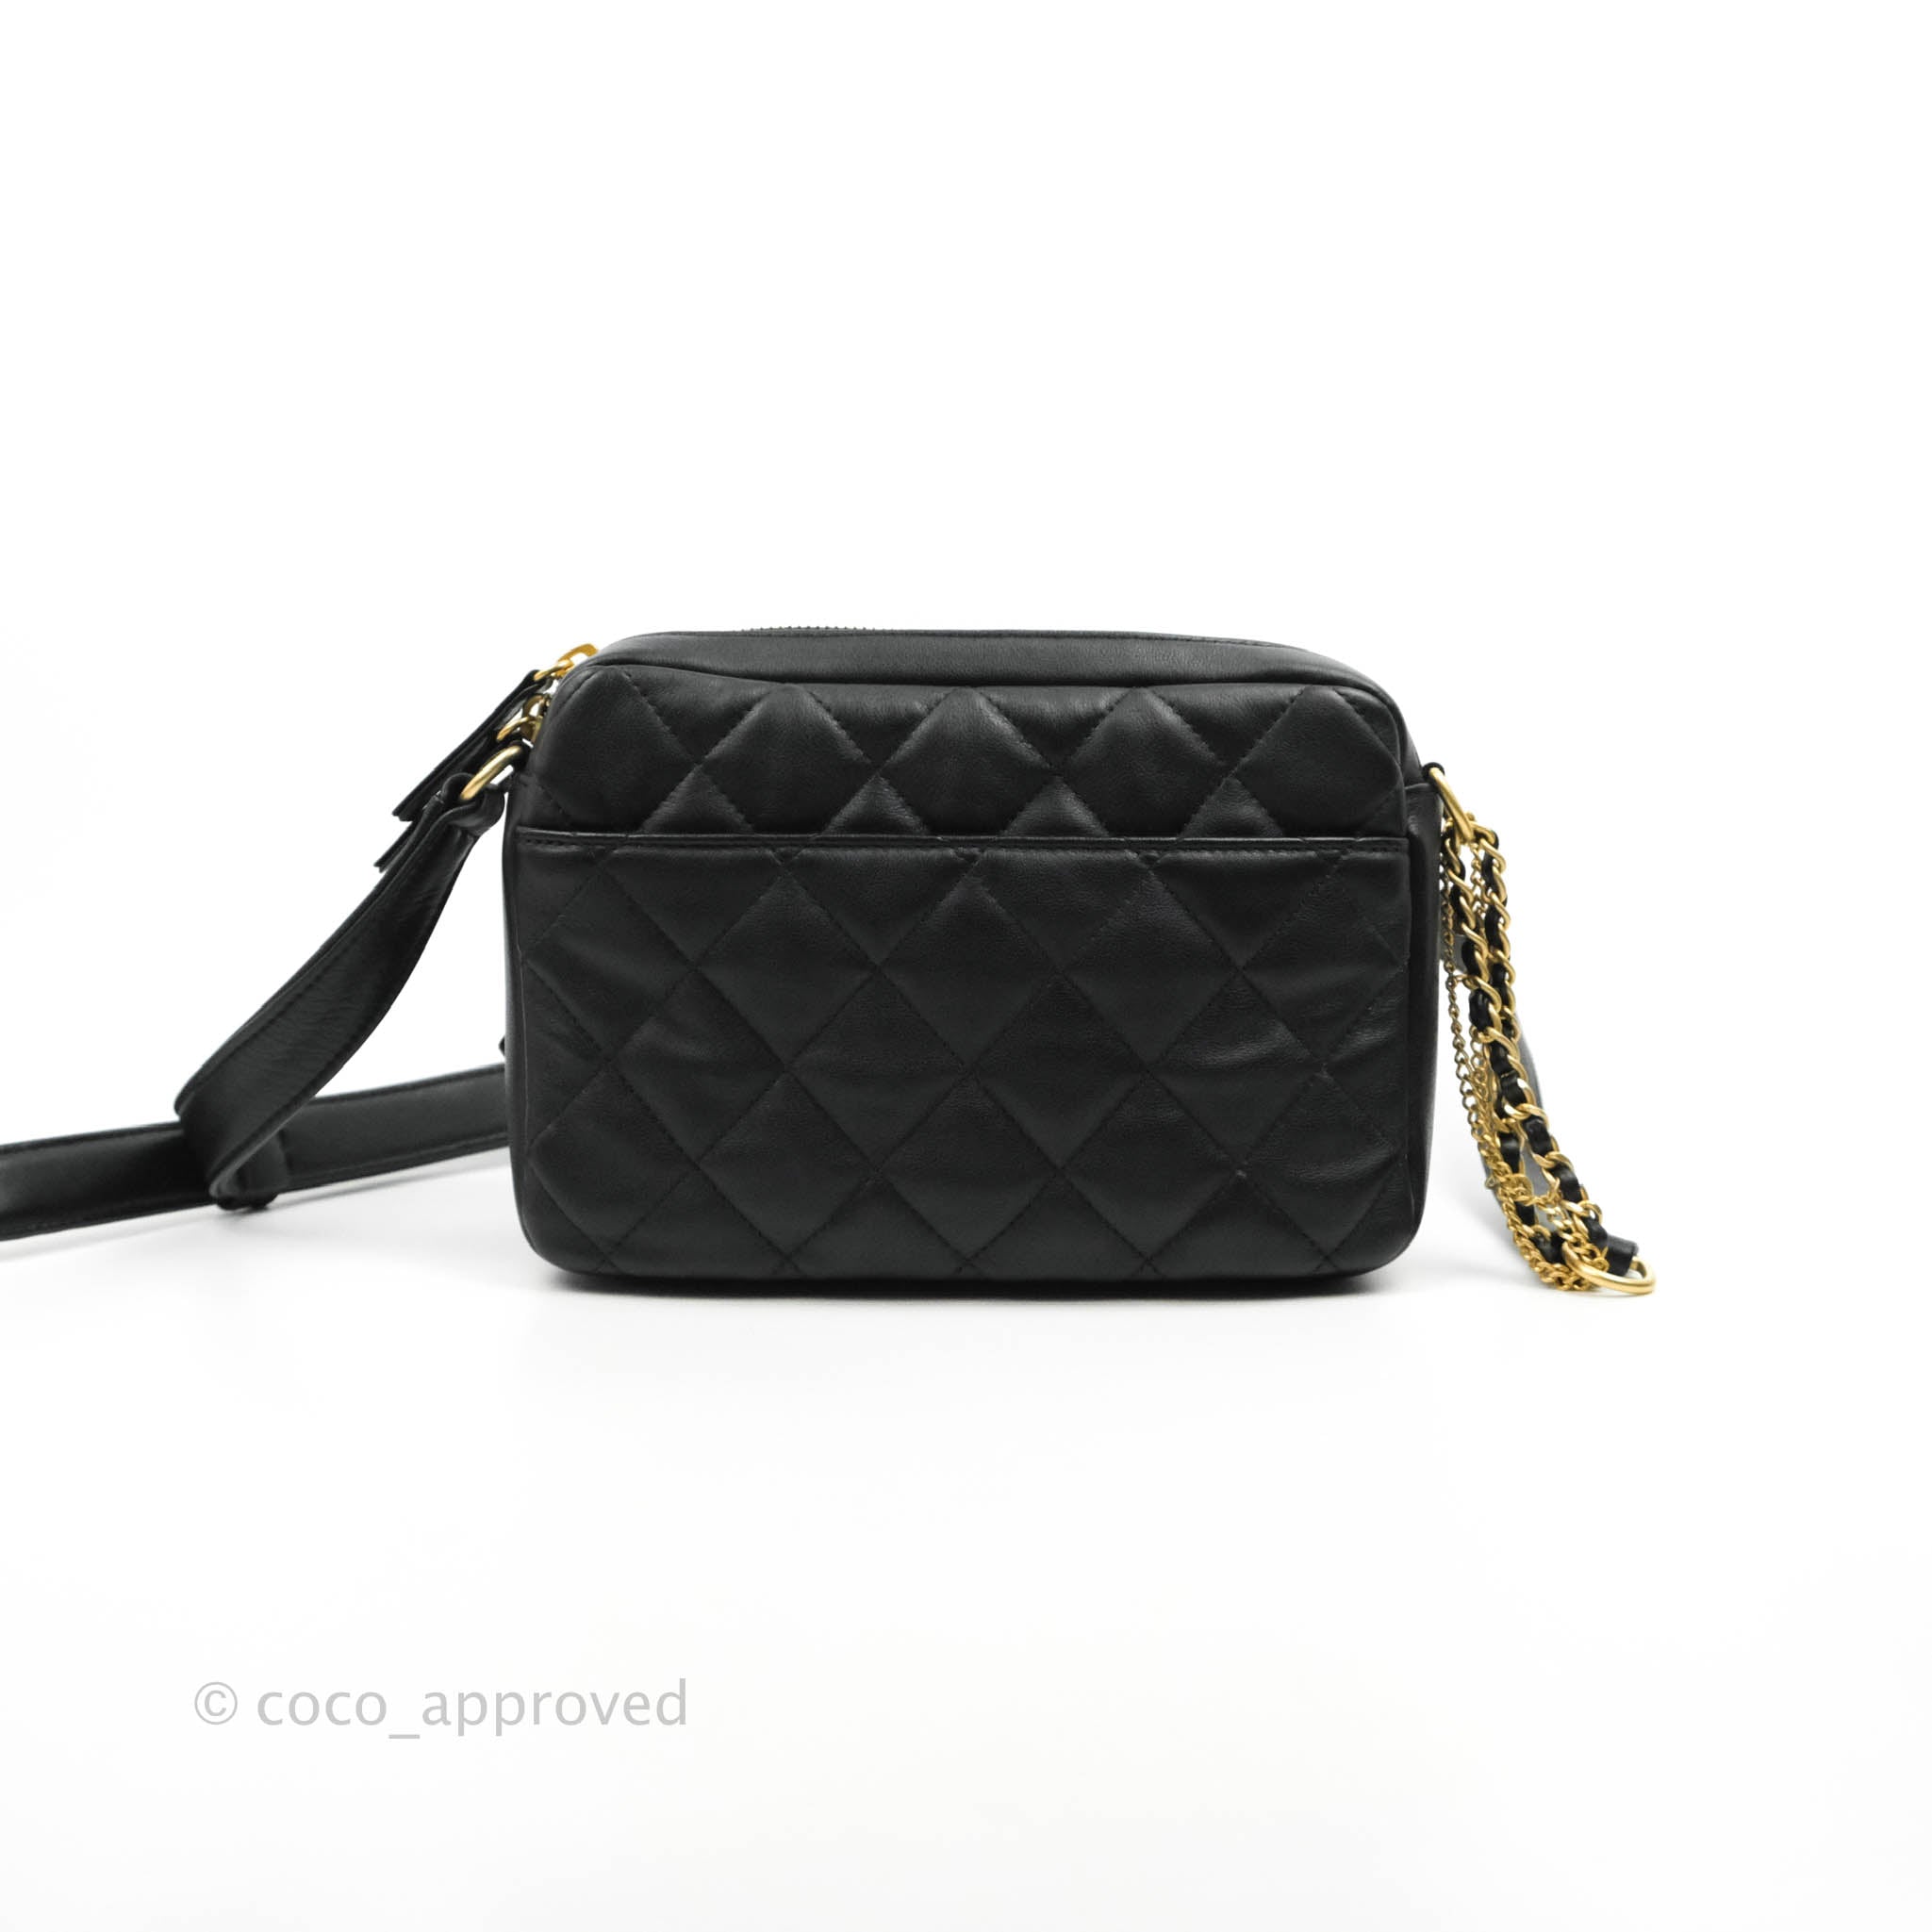 Chanel White Quilted Leather Herringbone Small Camera Case Bag